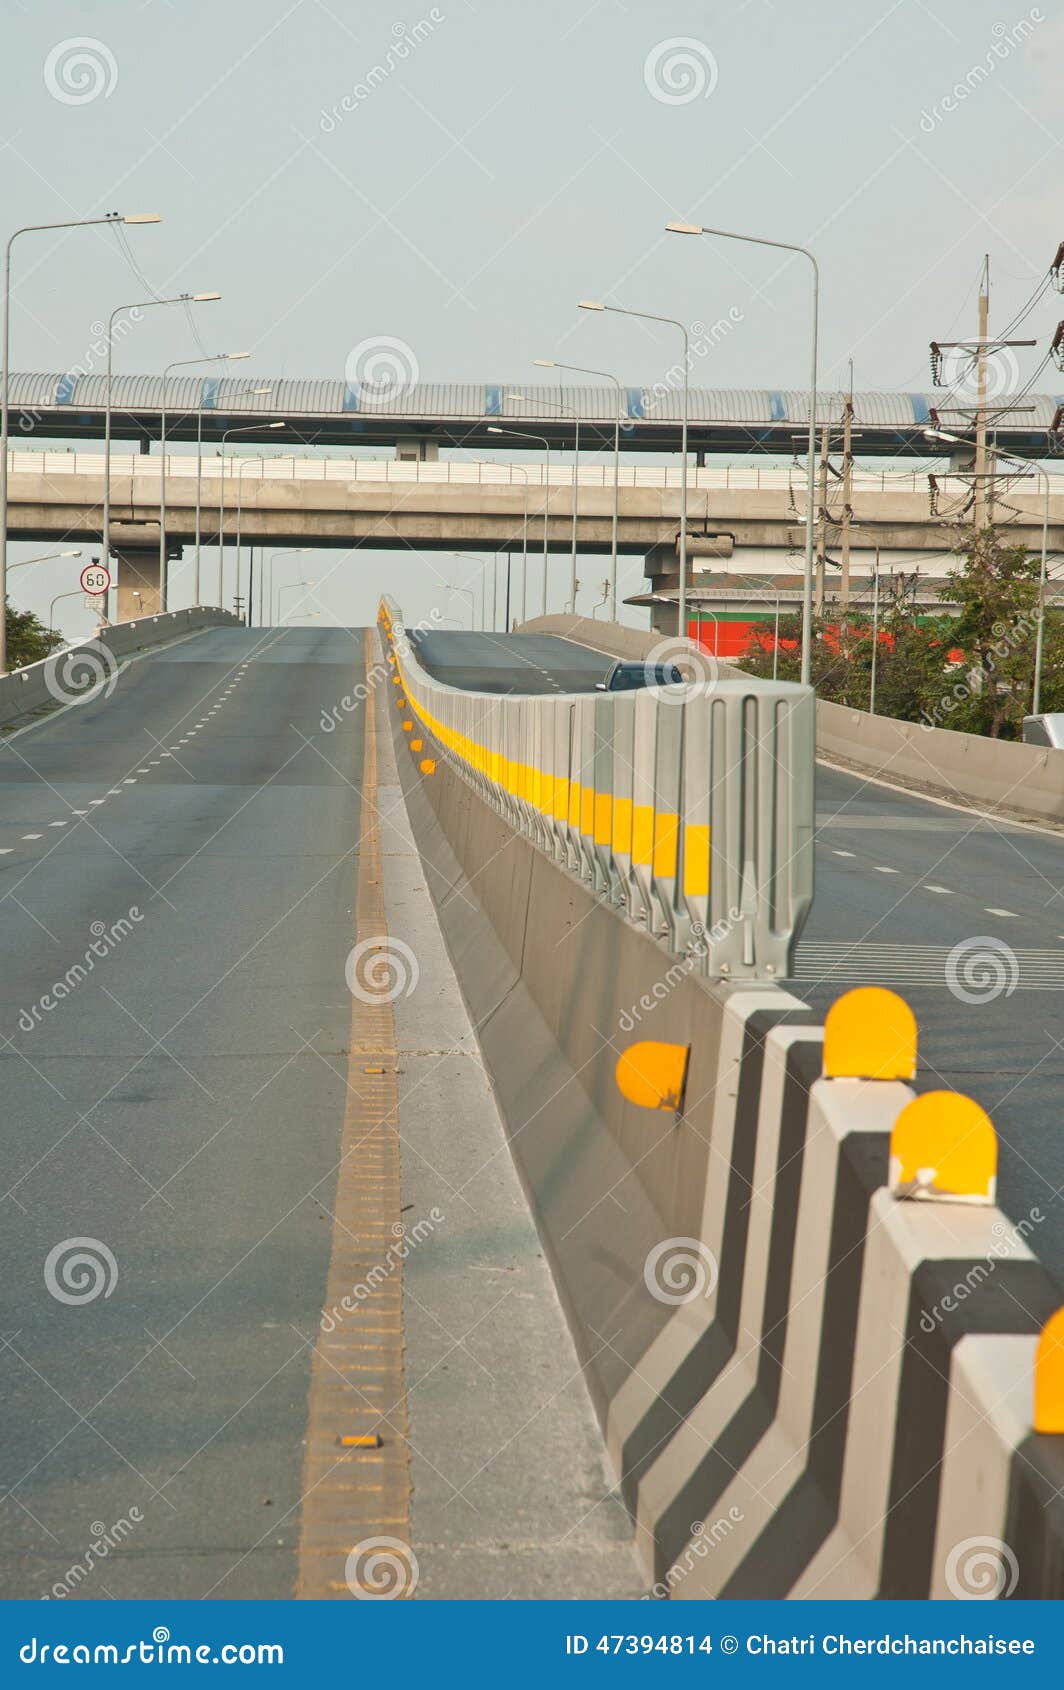 Road barriers stock photo. Image of barricade, road, traffic - 47394814